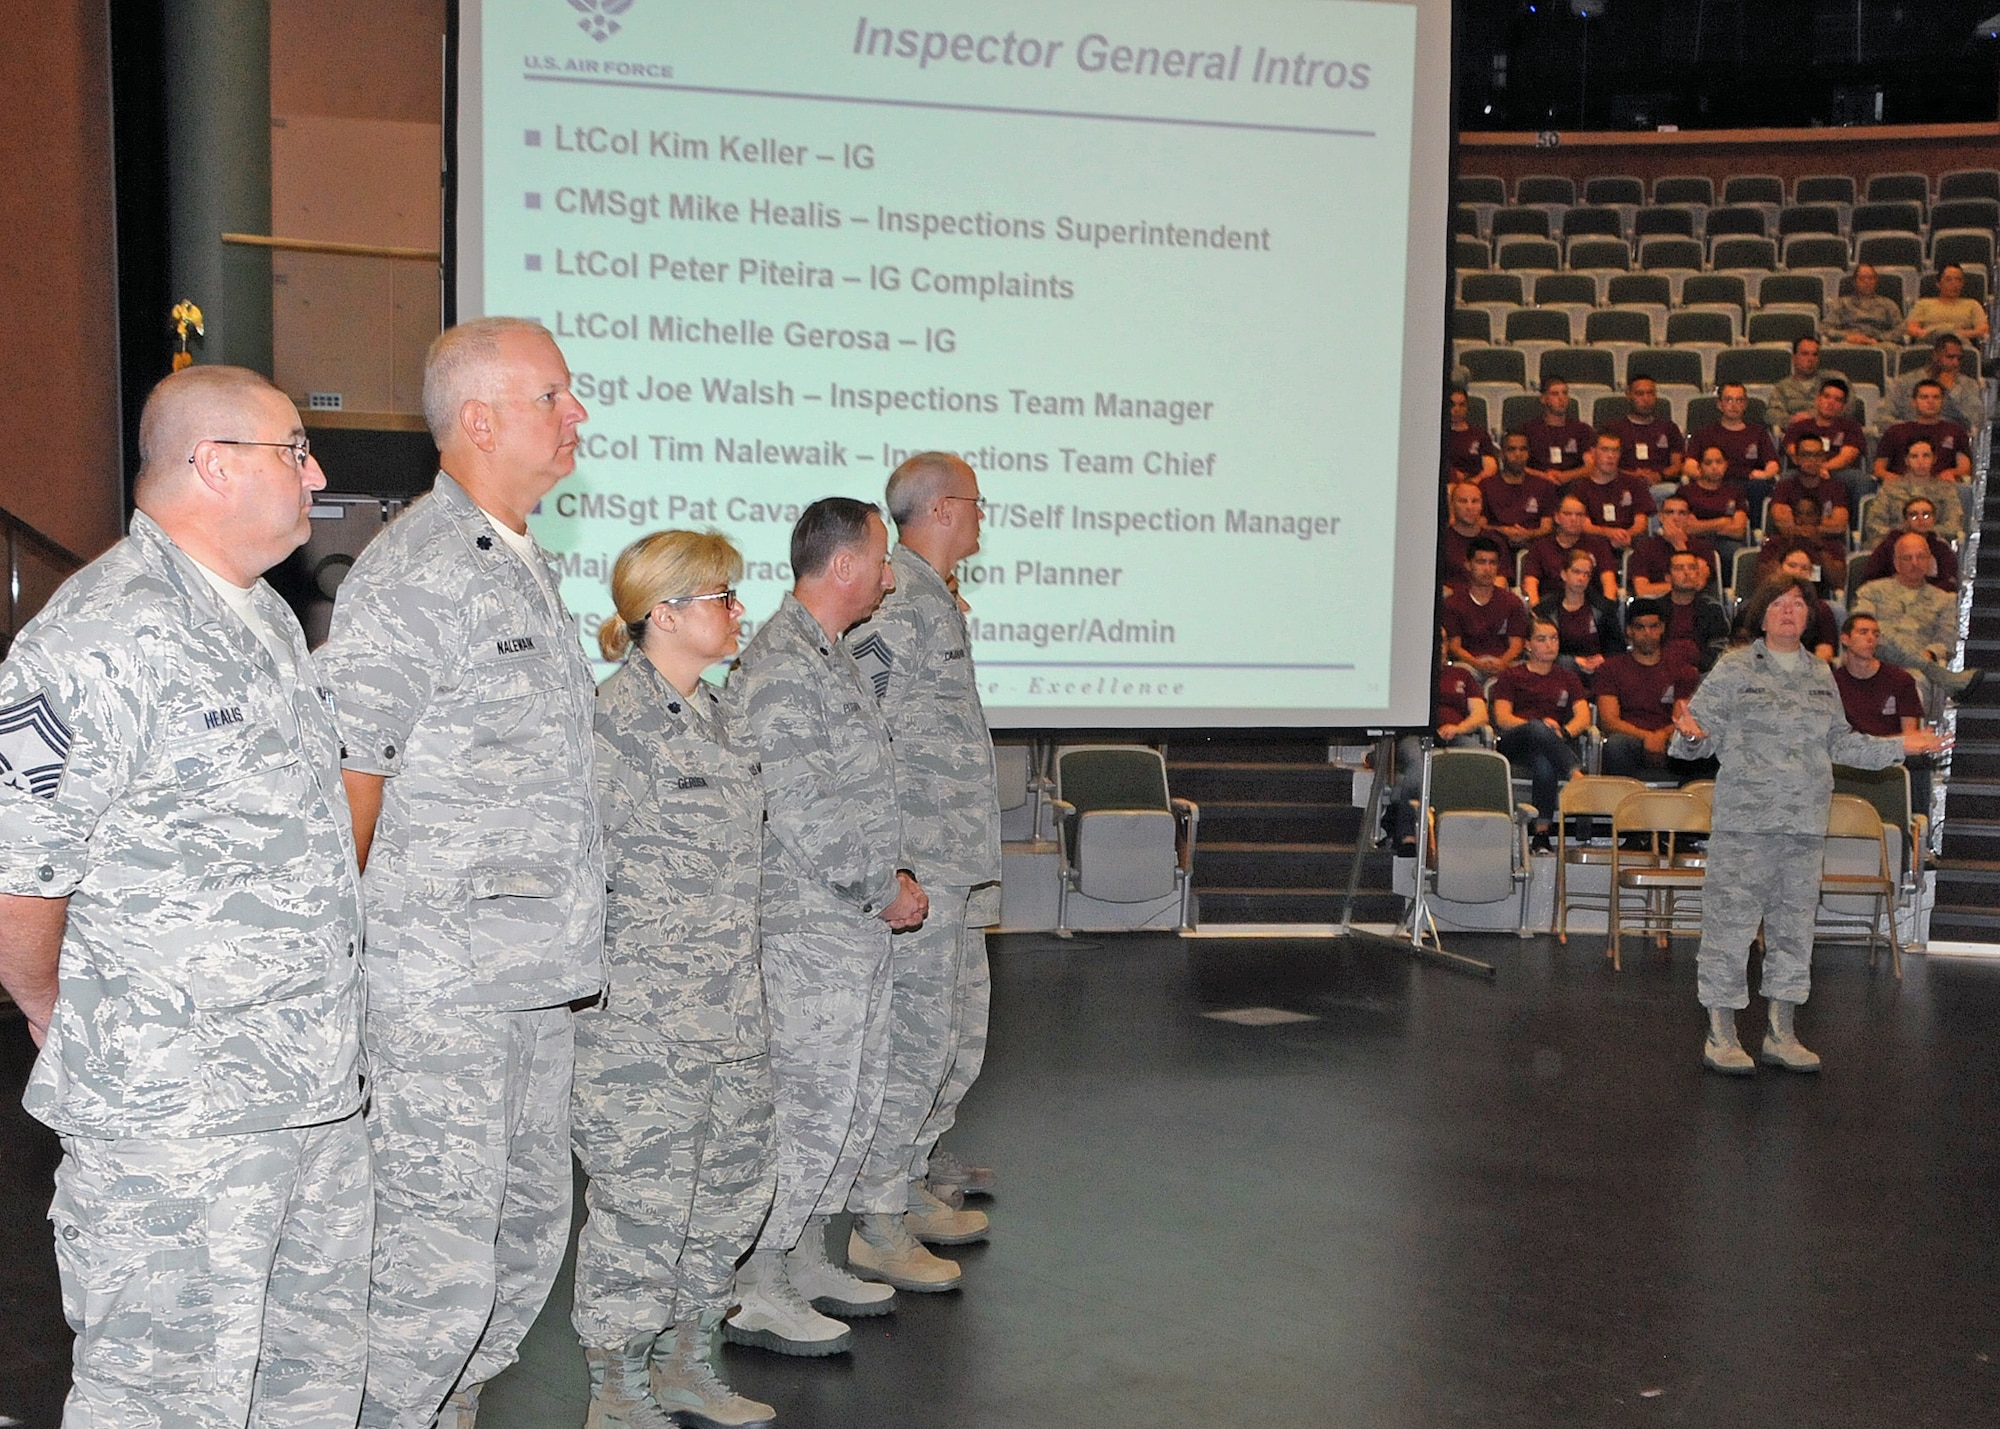 Lieutenant Colonel Kimberly Keller, 143d Mission Support Group Deputy Commander and Wing Inspector General Team Lead, introduces the members of the 143d AW Inspector General Team during the Rhode Island Air National Guard's annual Wingman Day on 3 August 2014. The event was held at the Knight Campus of the Community College of Rhode Island in Warwick, RI. National Guard Photo by Technical Sgt Jason Long (RELEASED)